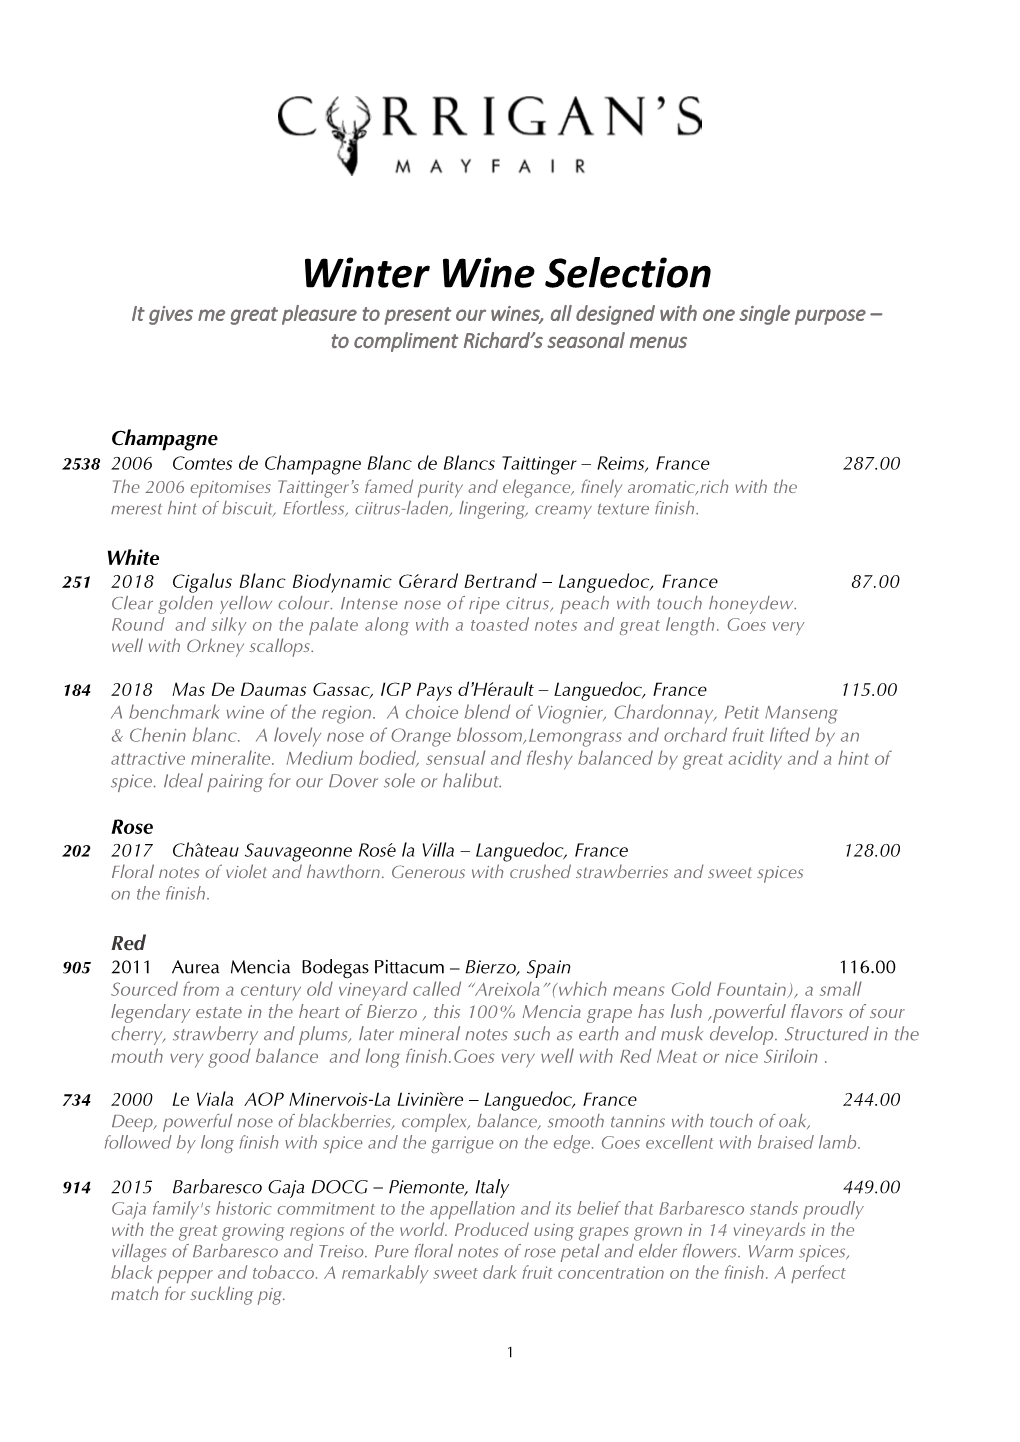 Winter Wine Selection It Gives Me Great Pleasure to Present Our Wines, All Designed with One Single Purpose – to Compliment Richard’S Seasonal Menus